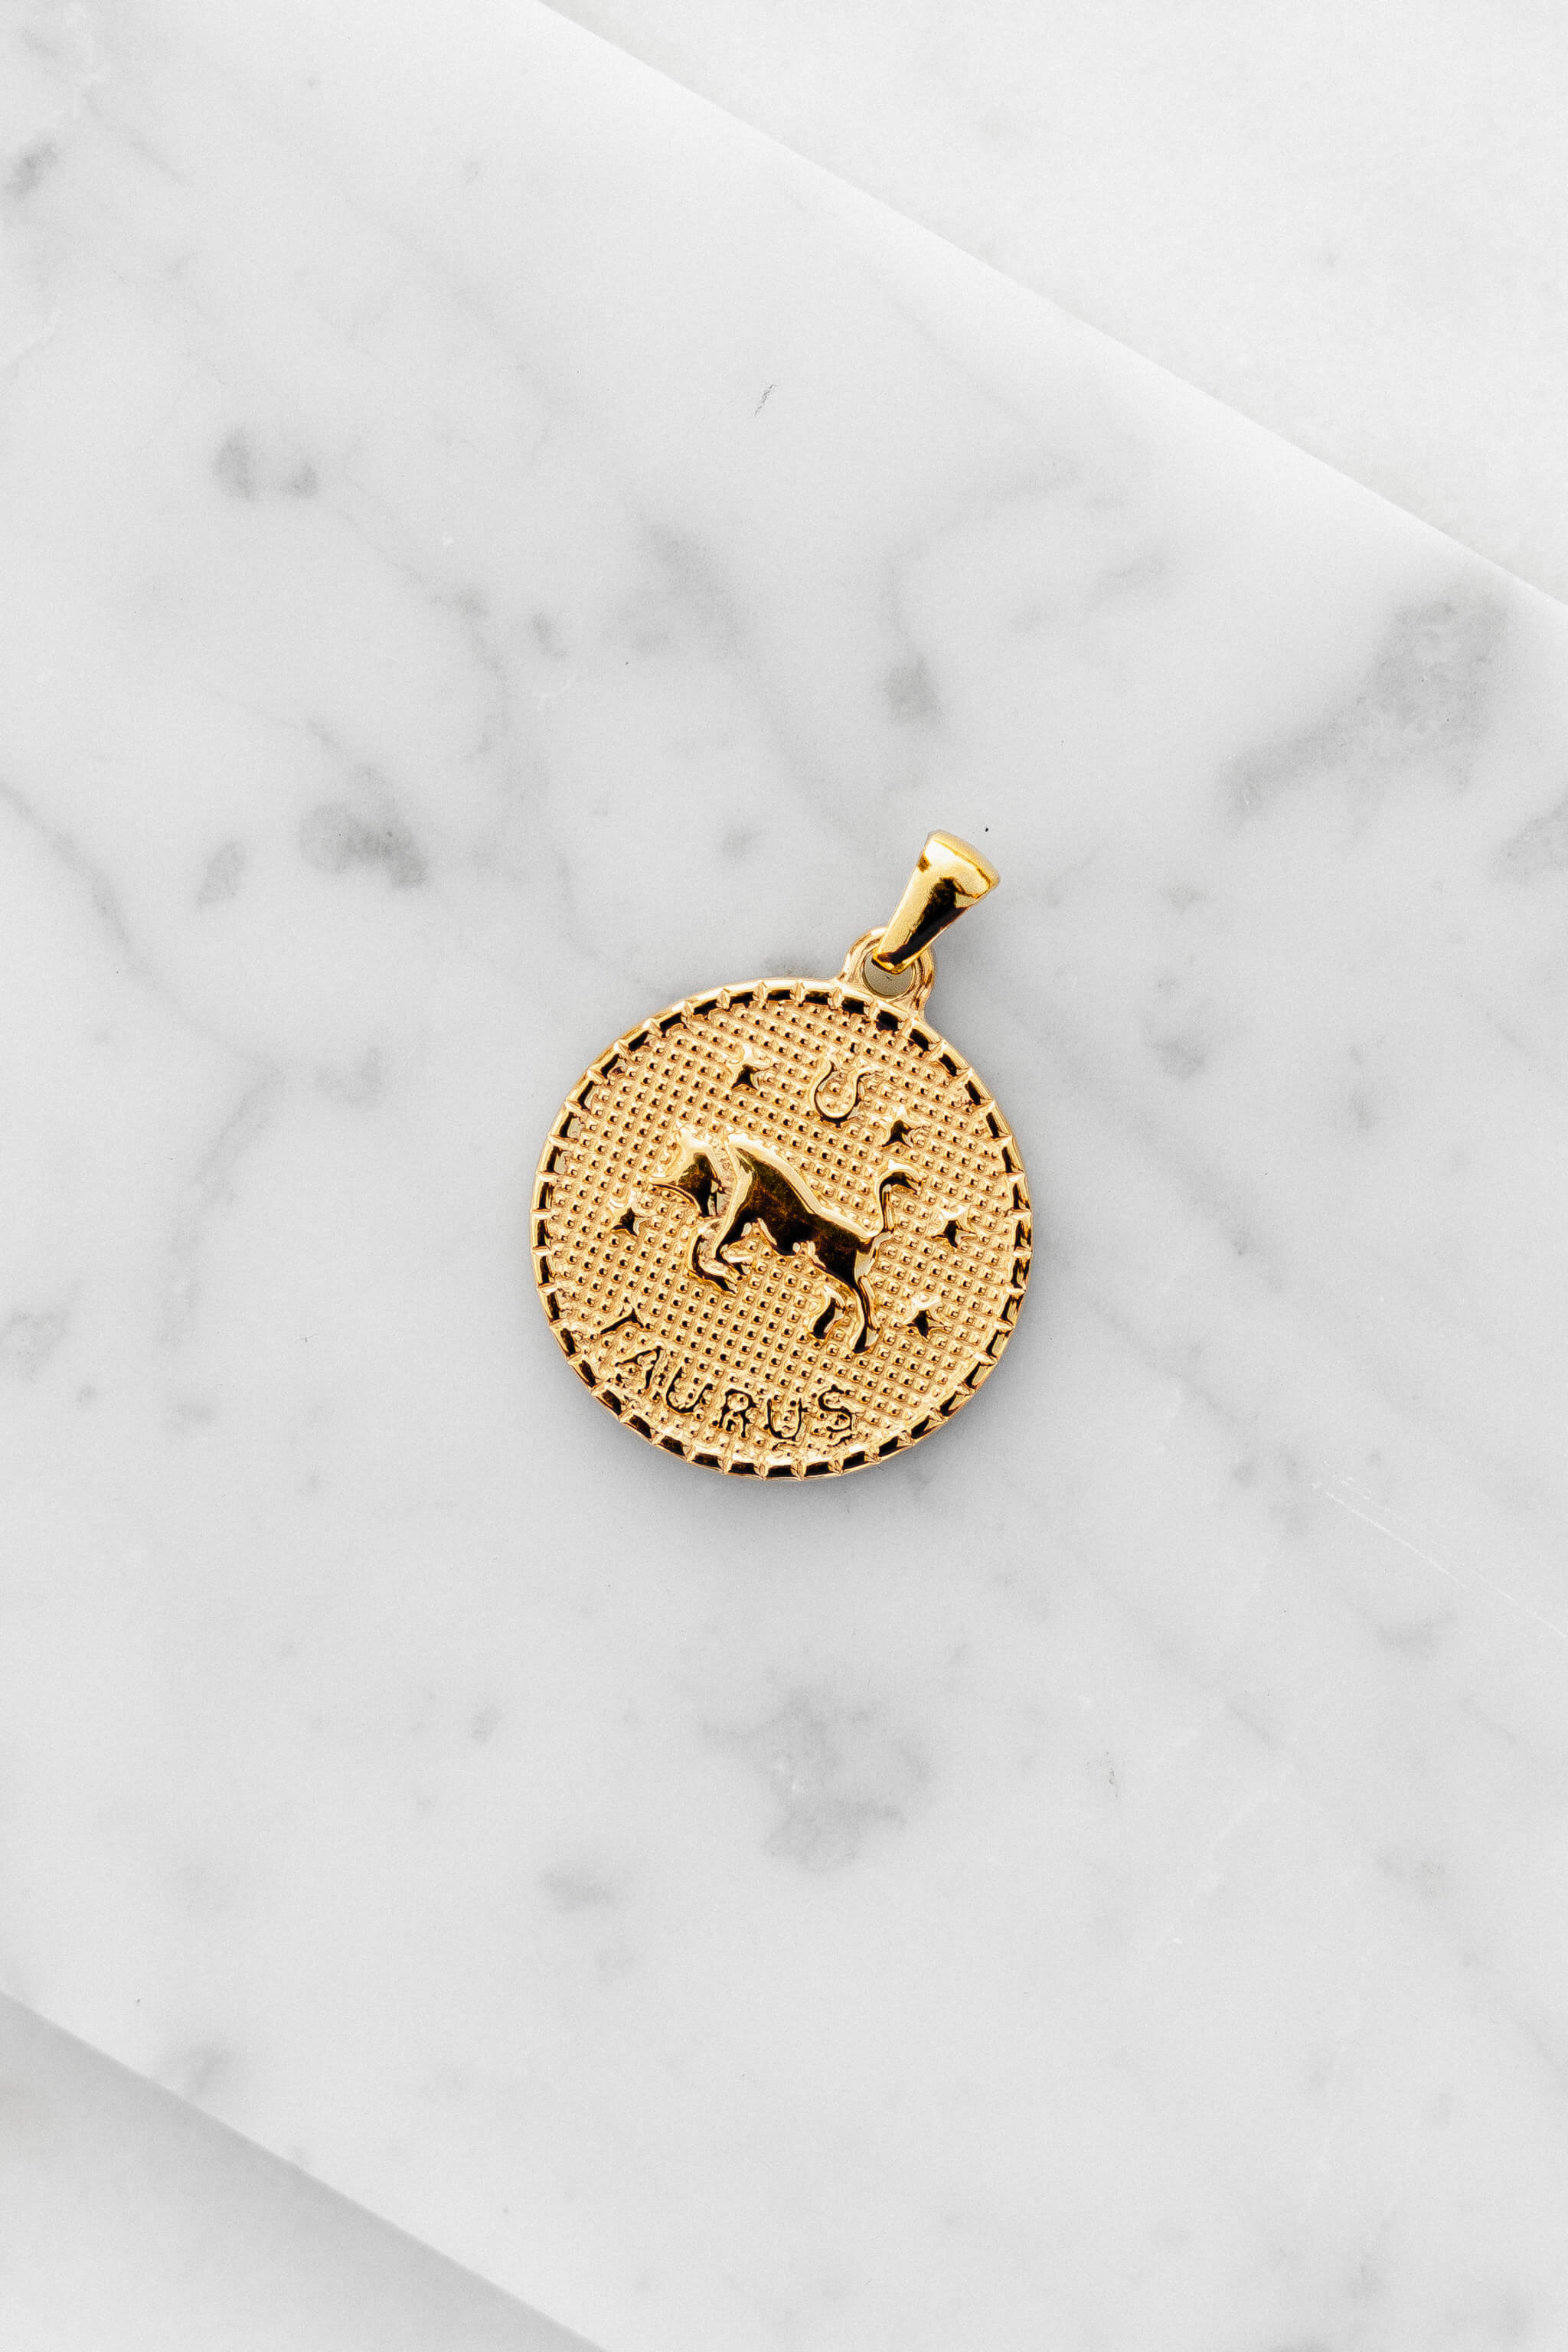 Taurus zodiac sign gold coin charm laying on a white marble